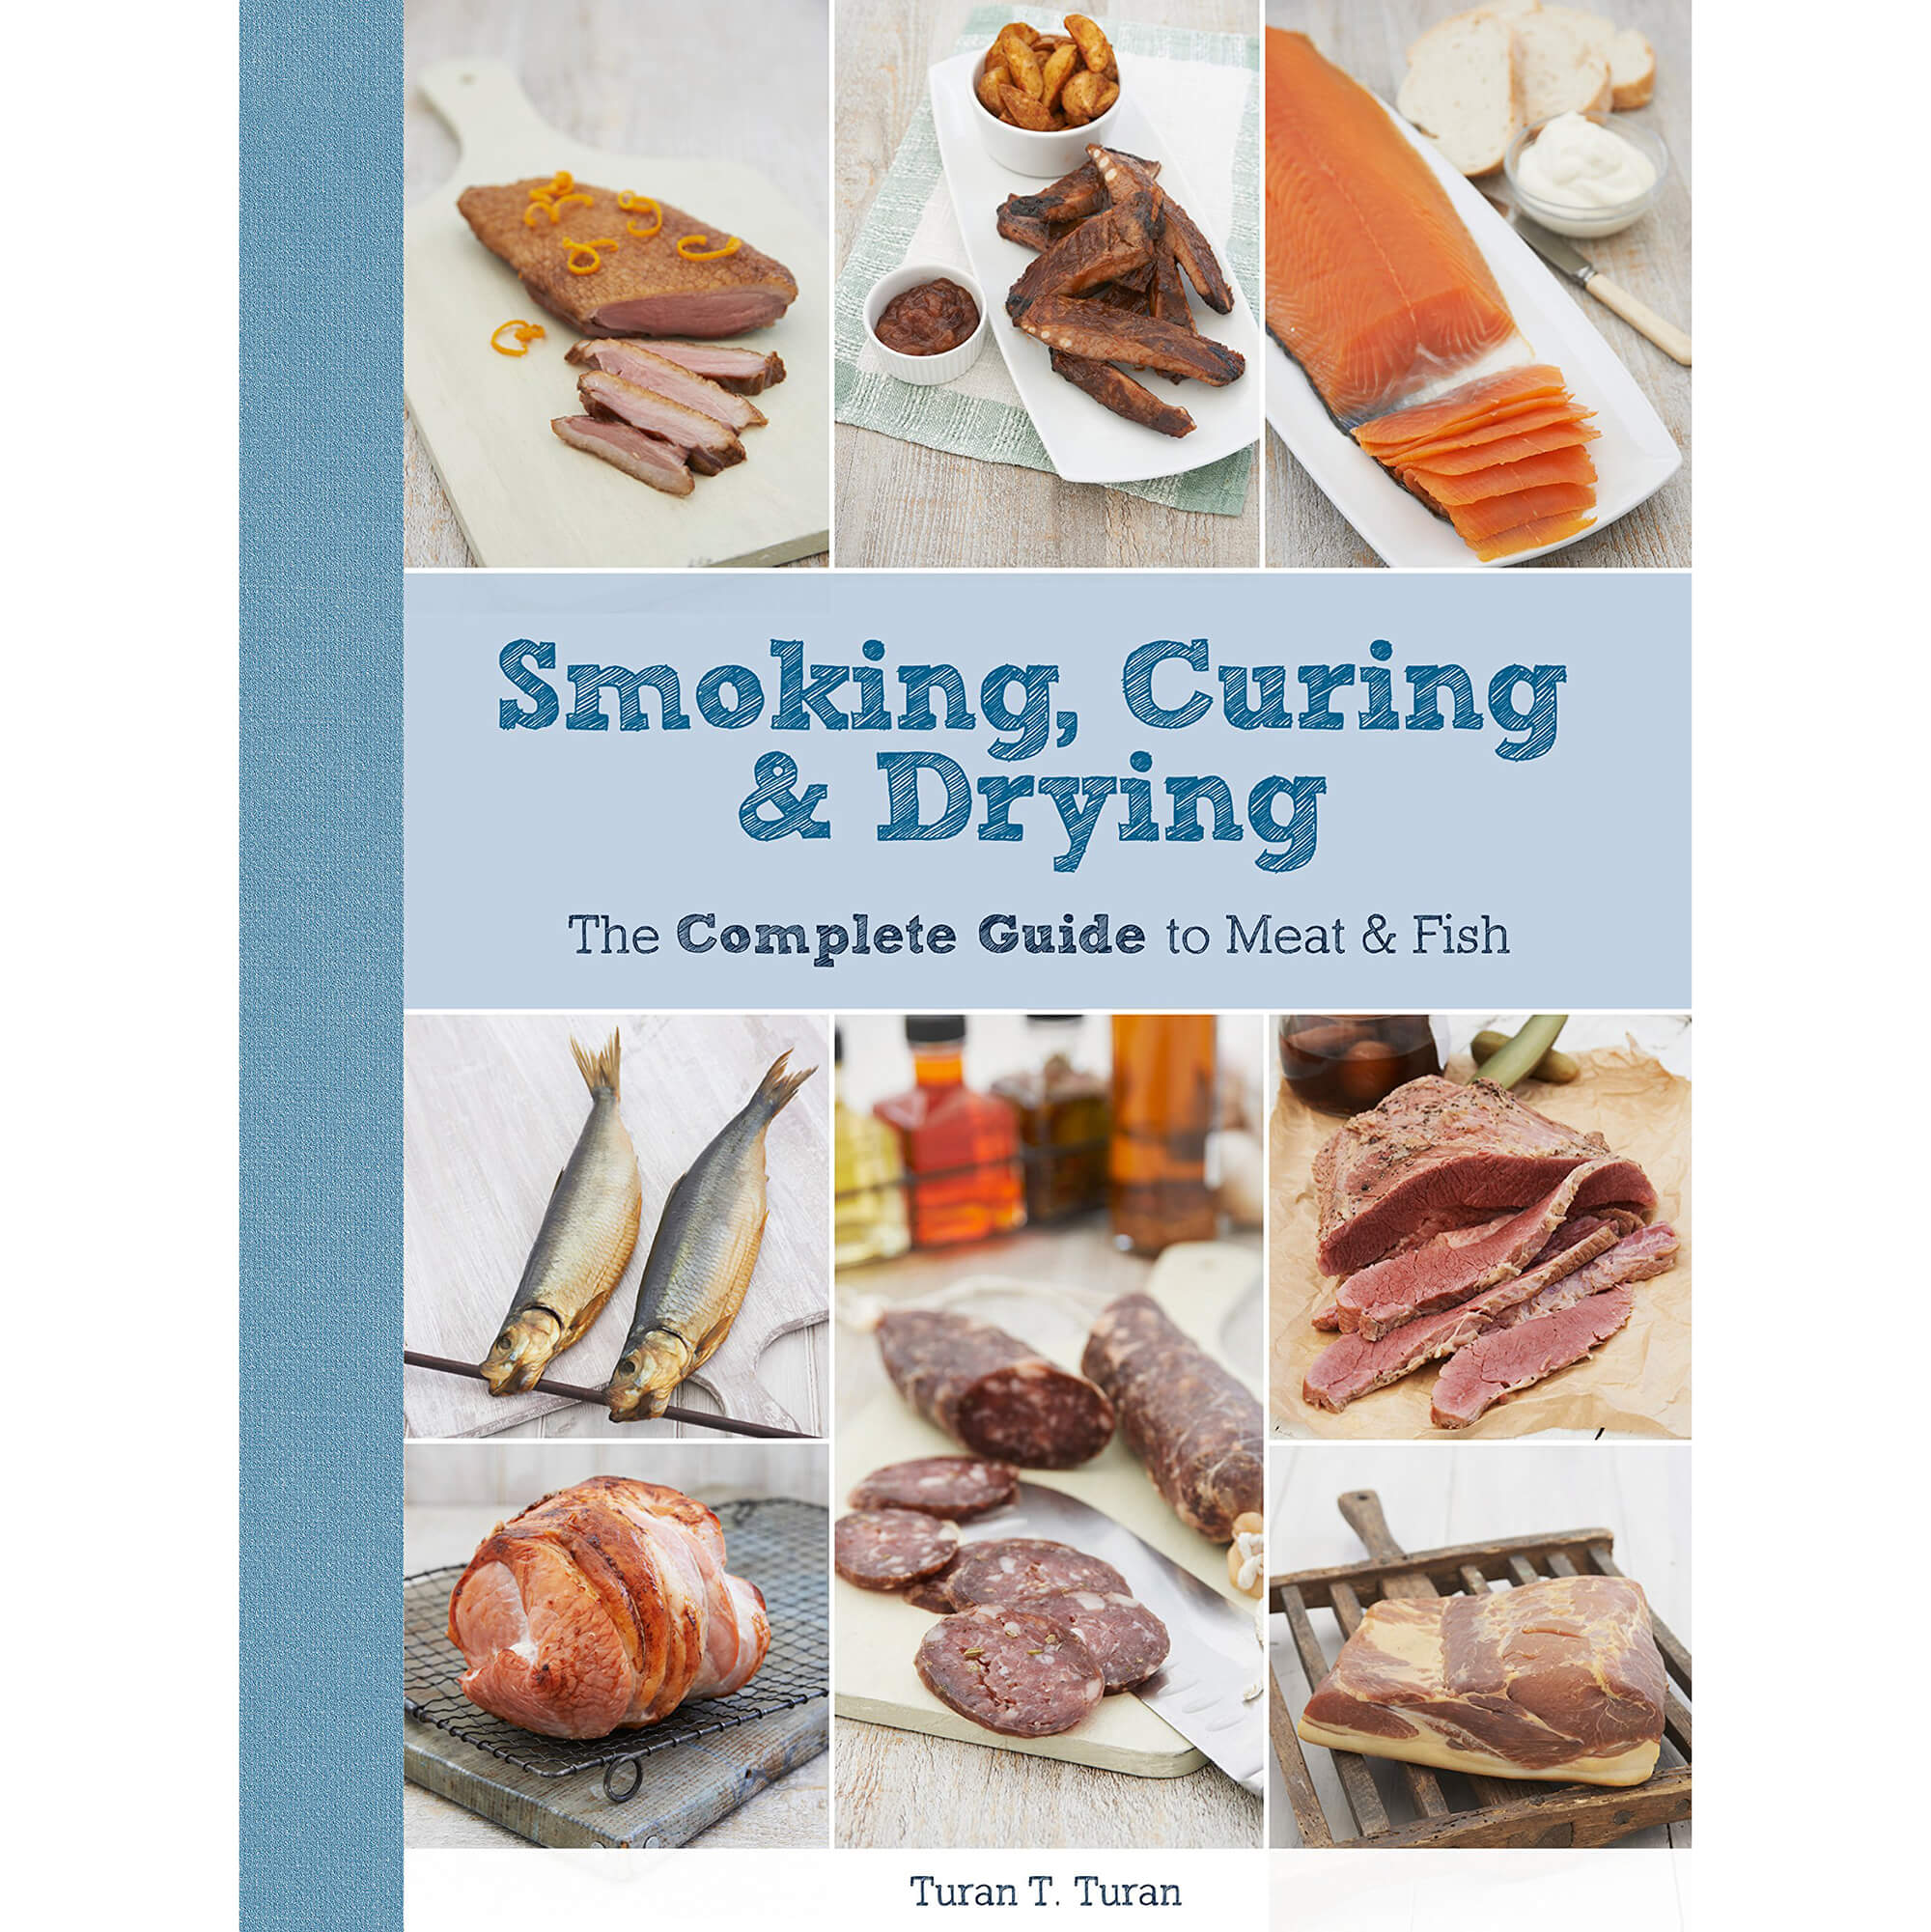 Smoking, Curing & Drying front cover.